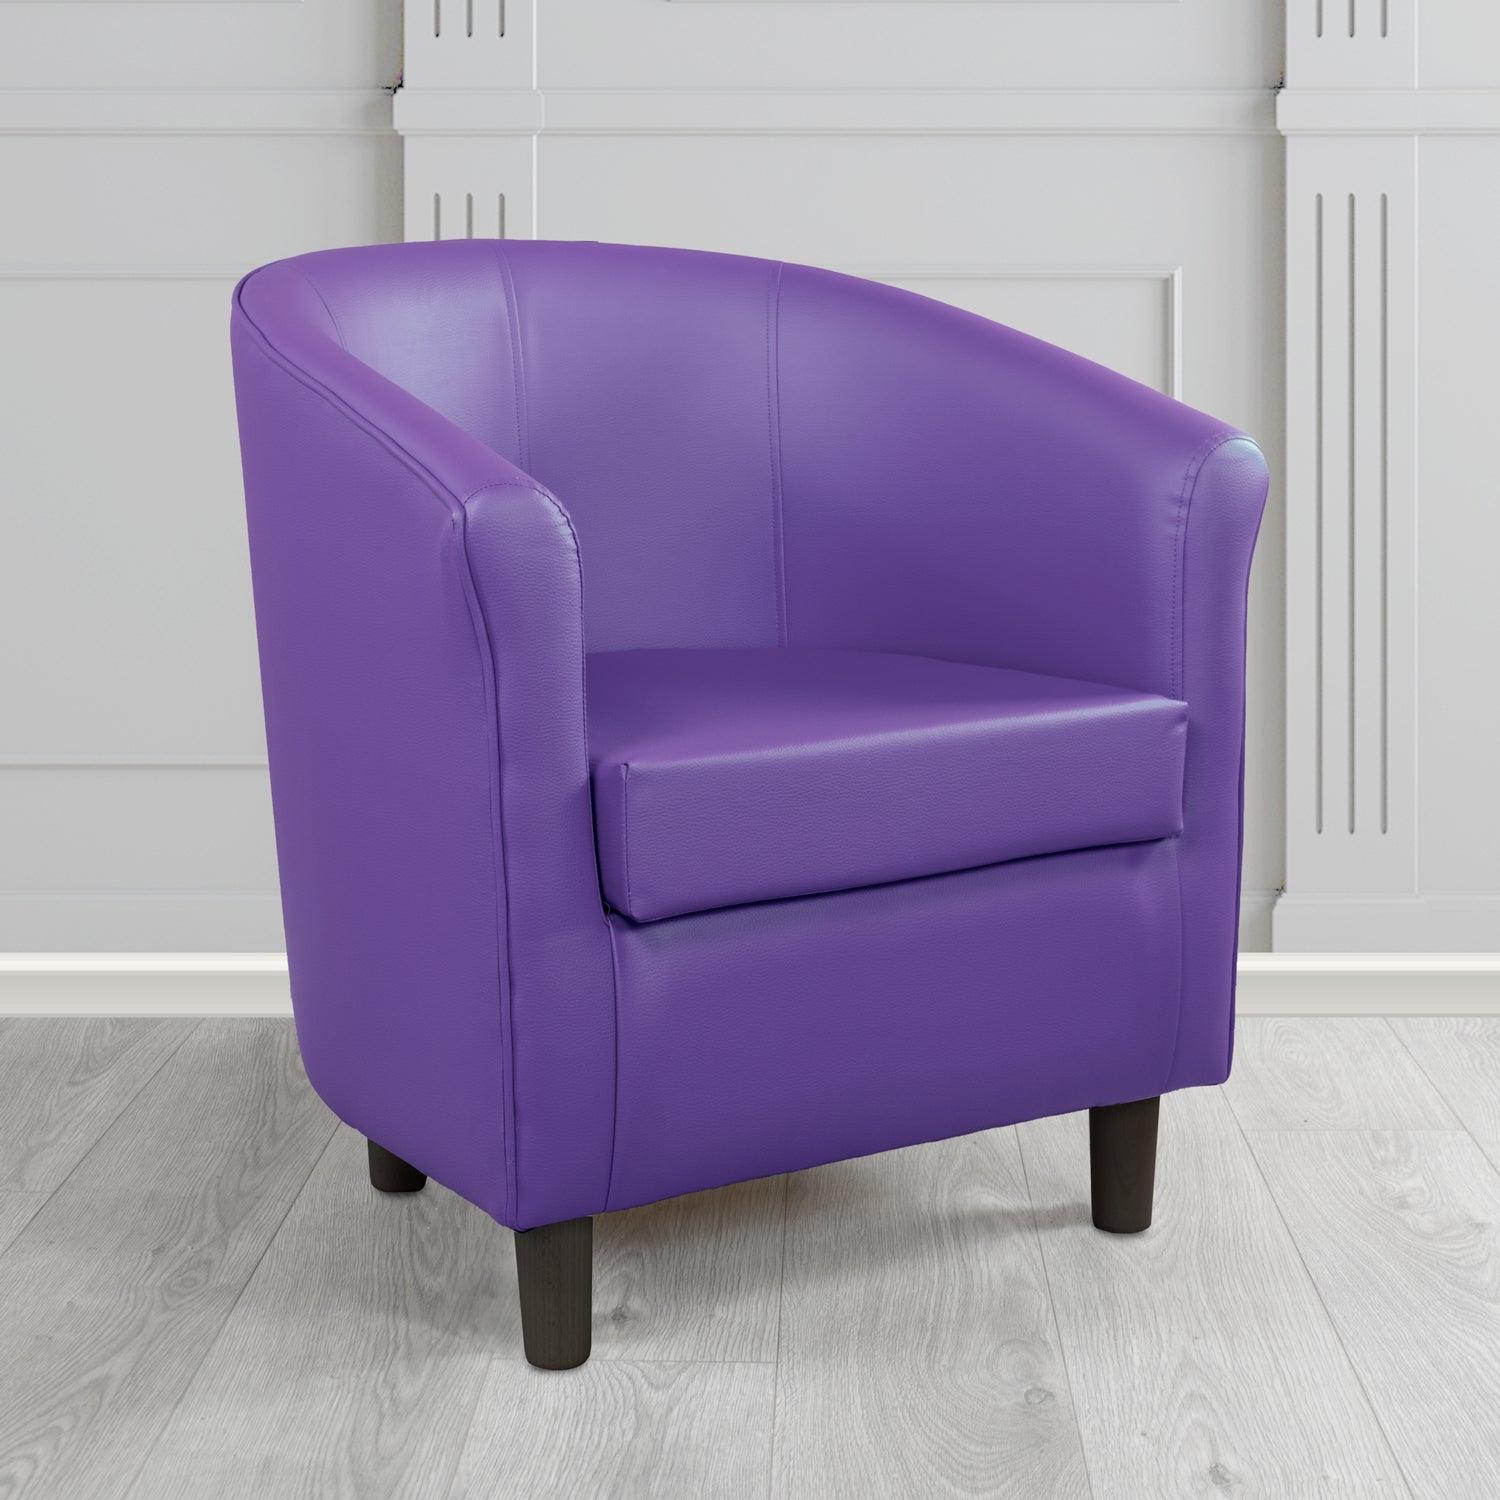 Tuscany Just Colour Ultraviolet Antimicrobial Crib 5 Contract Faux Leather Tub Chair - The Tub Chair Shop